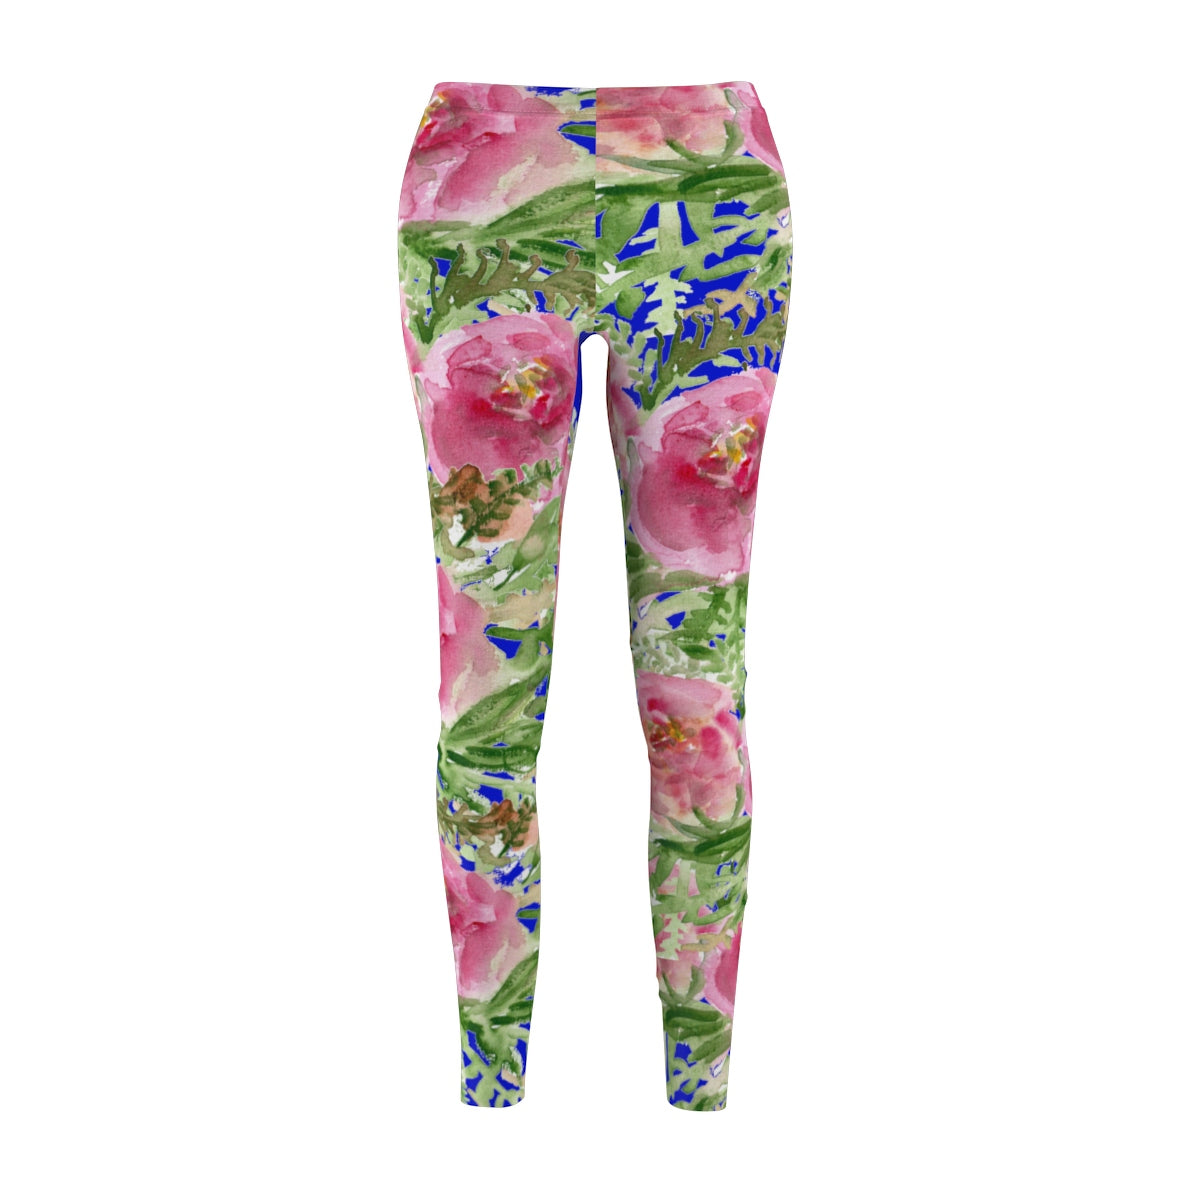 Blue Rose Floral Print Women's Tights / Casual Leggings - Made in USA(US Size: XS-2XL)-Casual Leggings-M-Heidi Kimura Art LLC Blue Rose Women's Leggings, Blue Rose Floral Print Women's Tights / Casual Leggings - Made in USA (US Size: XS-2XL)